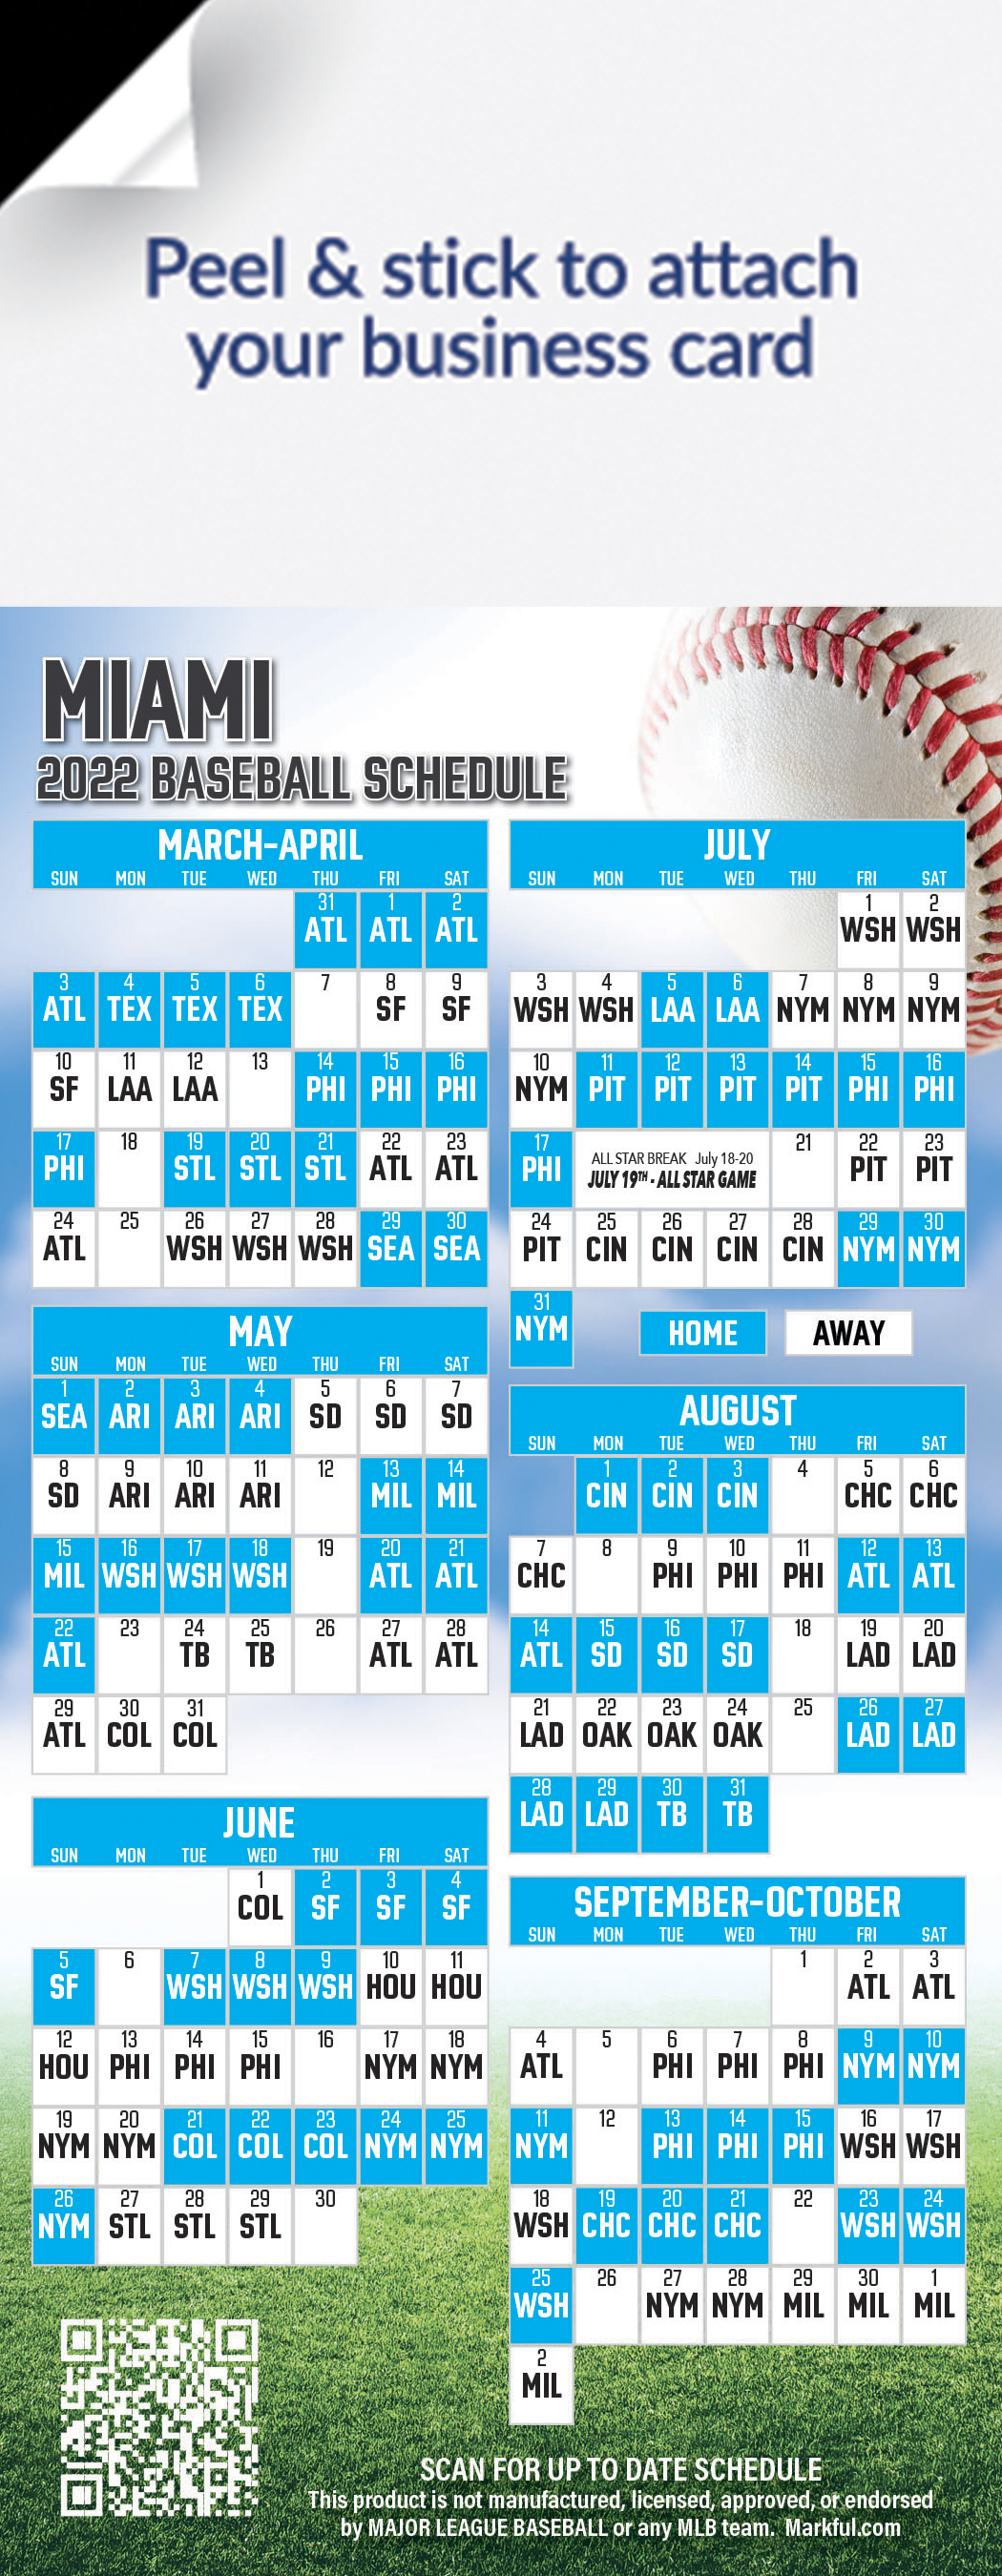 Miami Marlins 2022 Schedule 2022 Miami Marlins Schedule Magnets & Magnetic Schedules | Markful